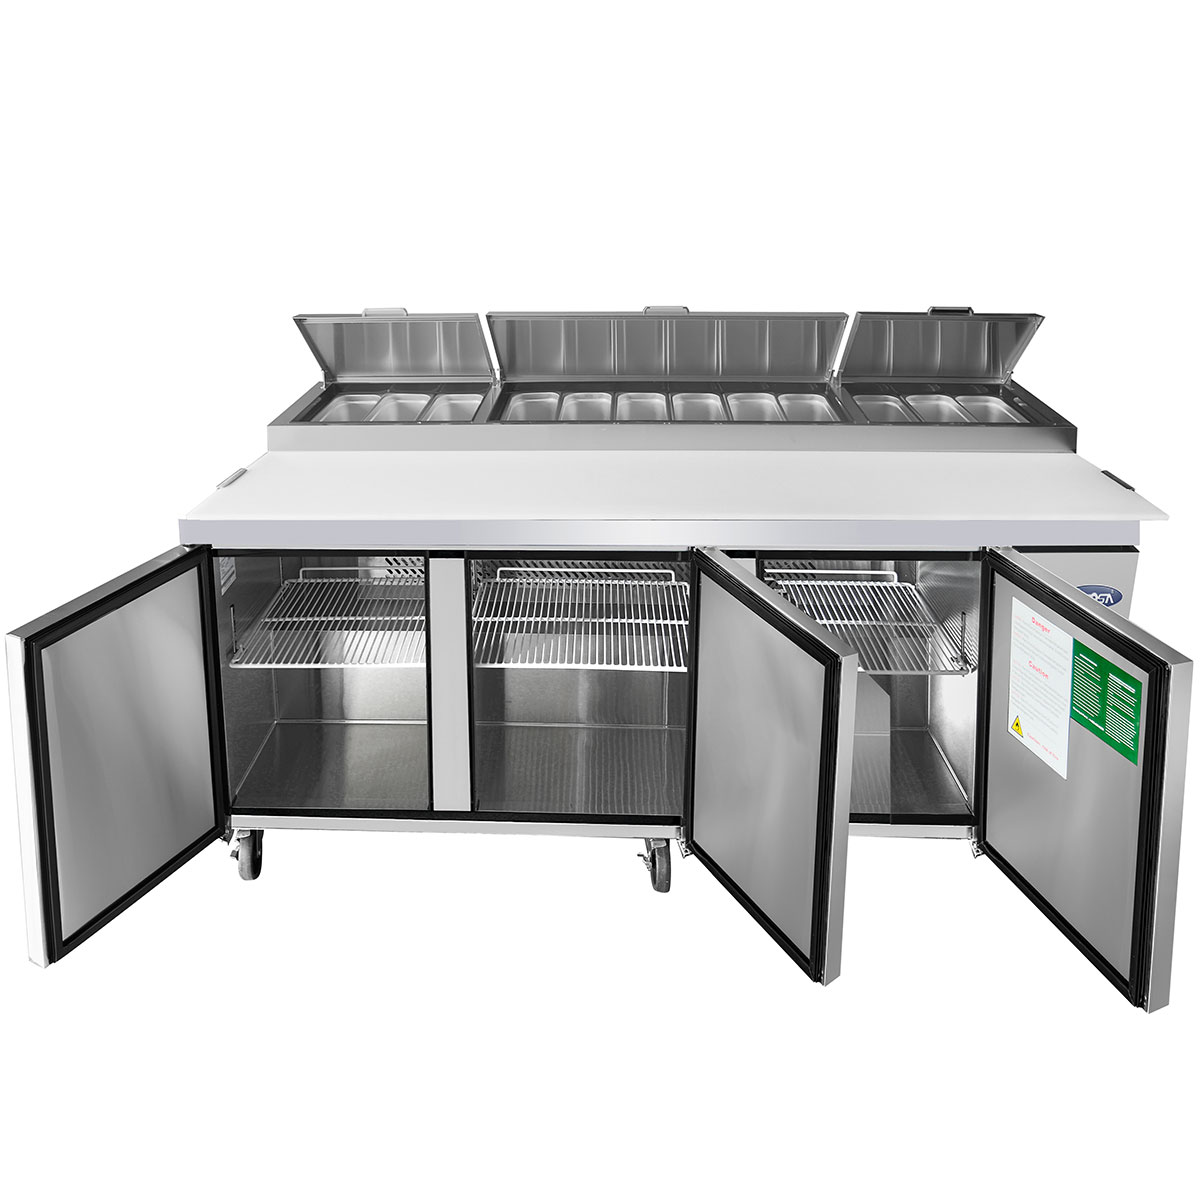 MPF8203GR — 93″ Refrigerated Pizza Prep. Table - Atosa USA